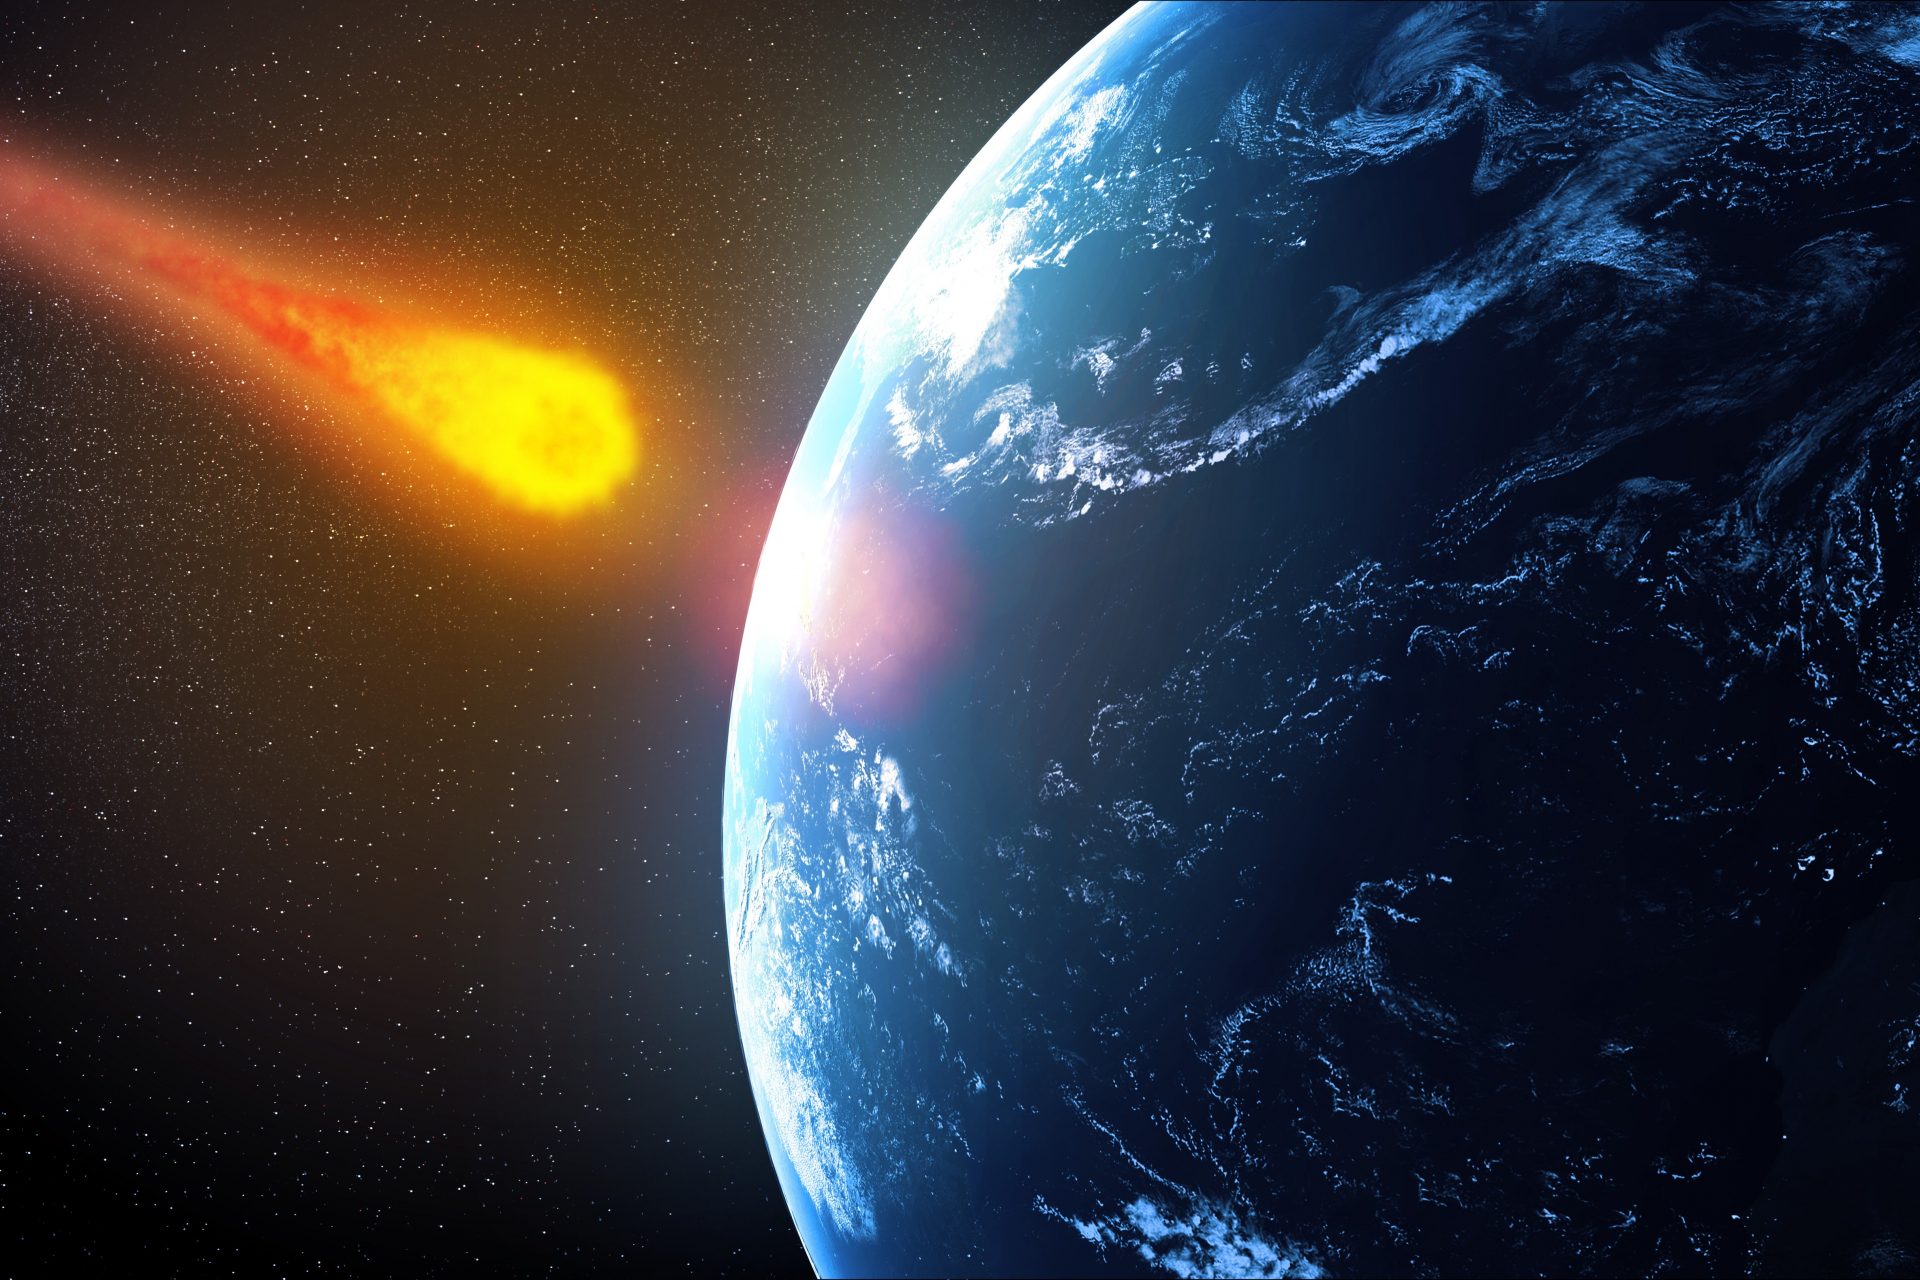 New report finds Earth unprepared for catastrophic asteroid impact